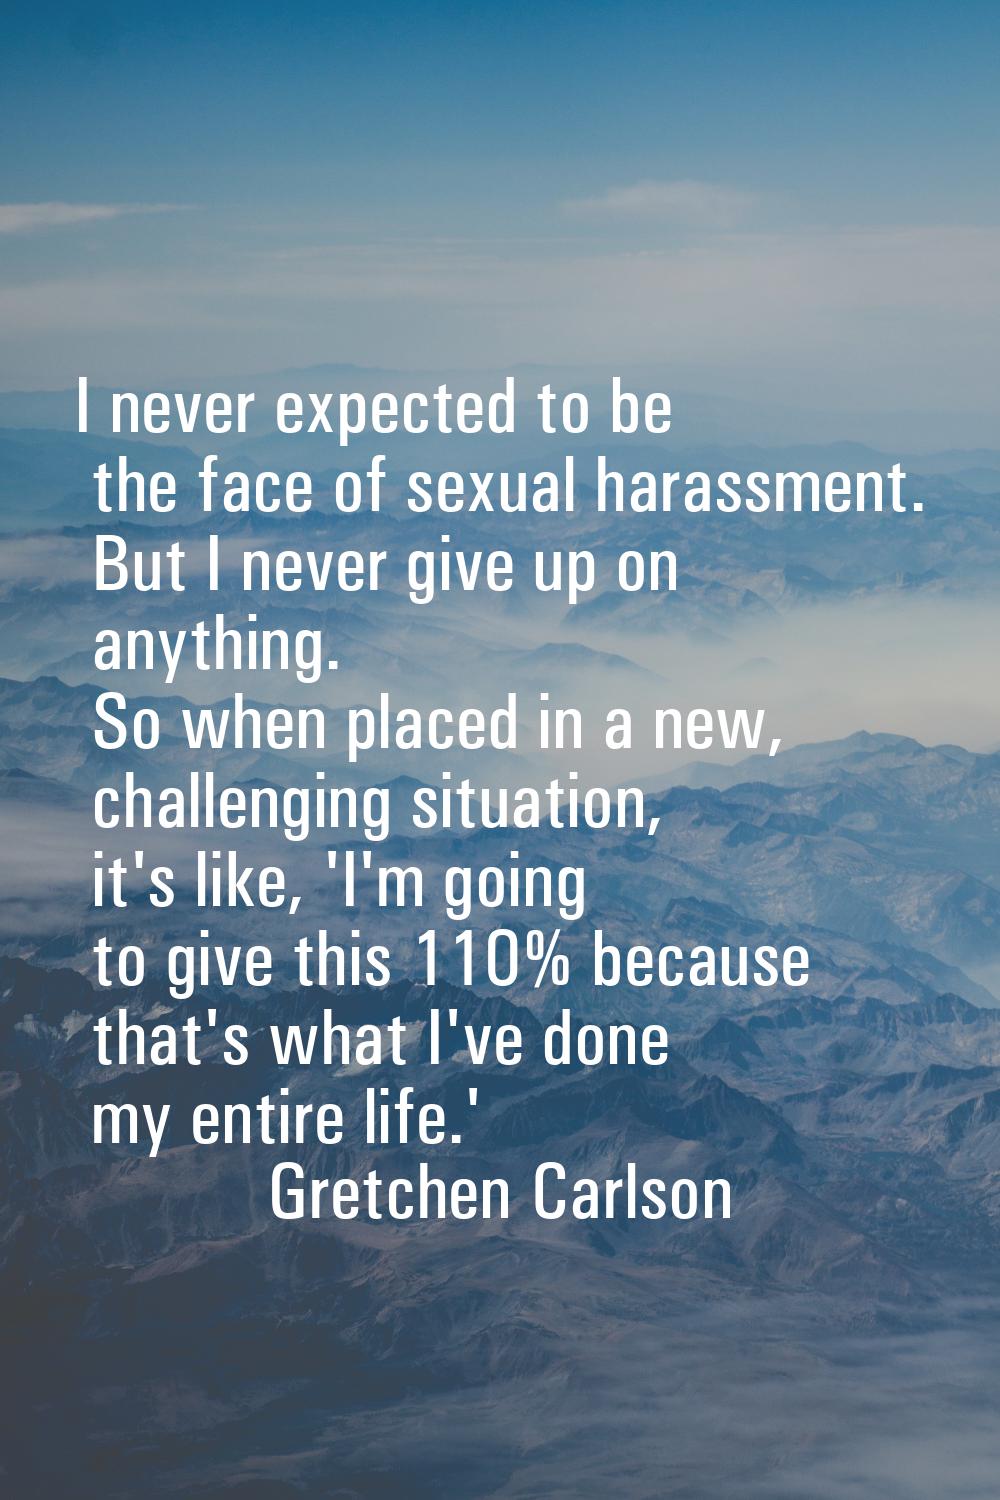 I never expected to be the face of sexual harassment. But I never give up on anything. So when plac